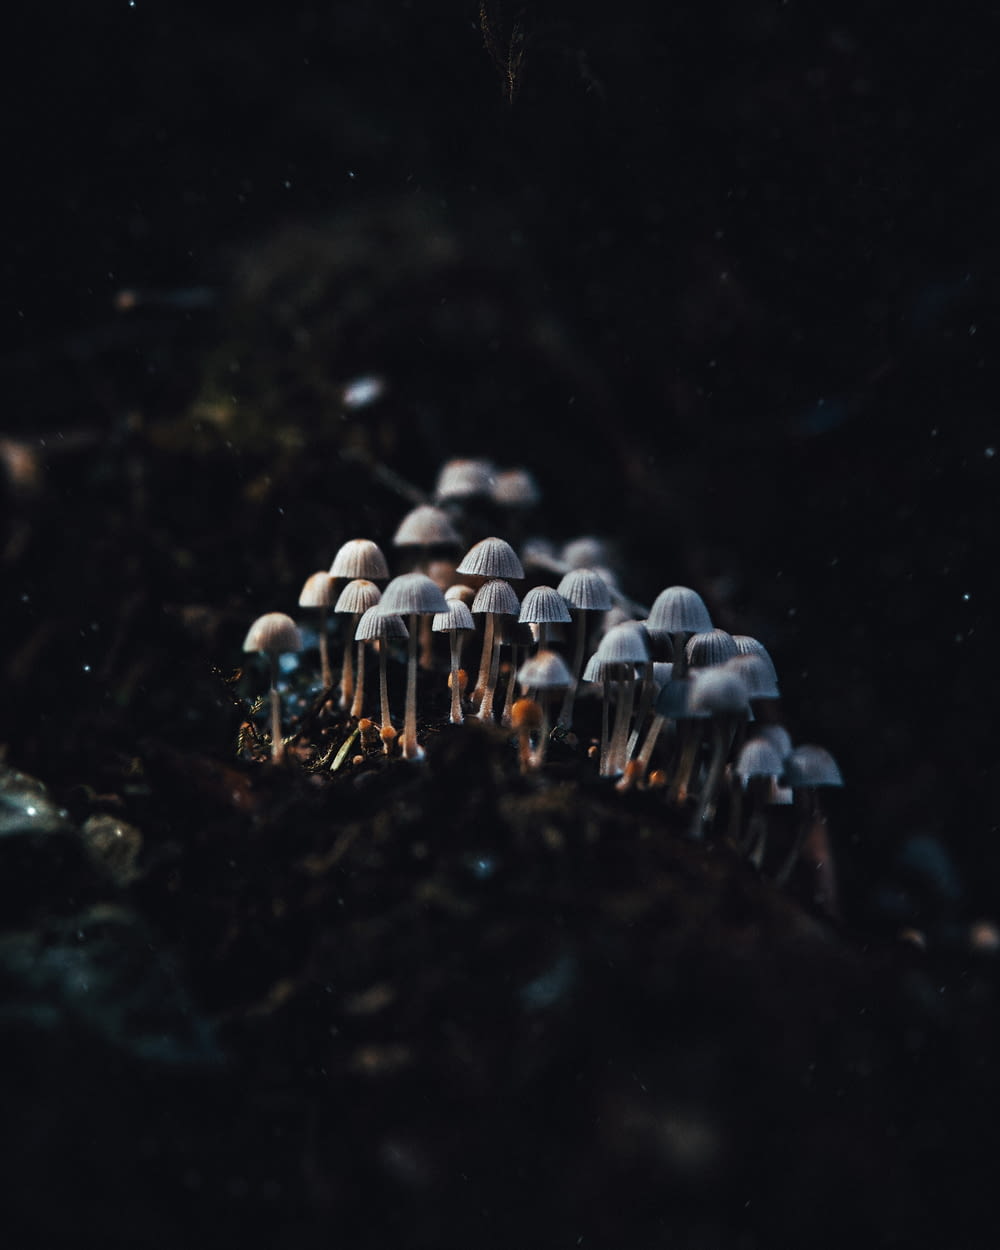 a group of mushrooms growing out of the ground